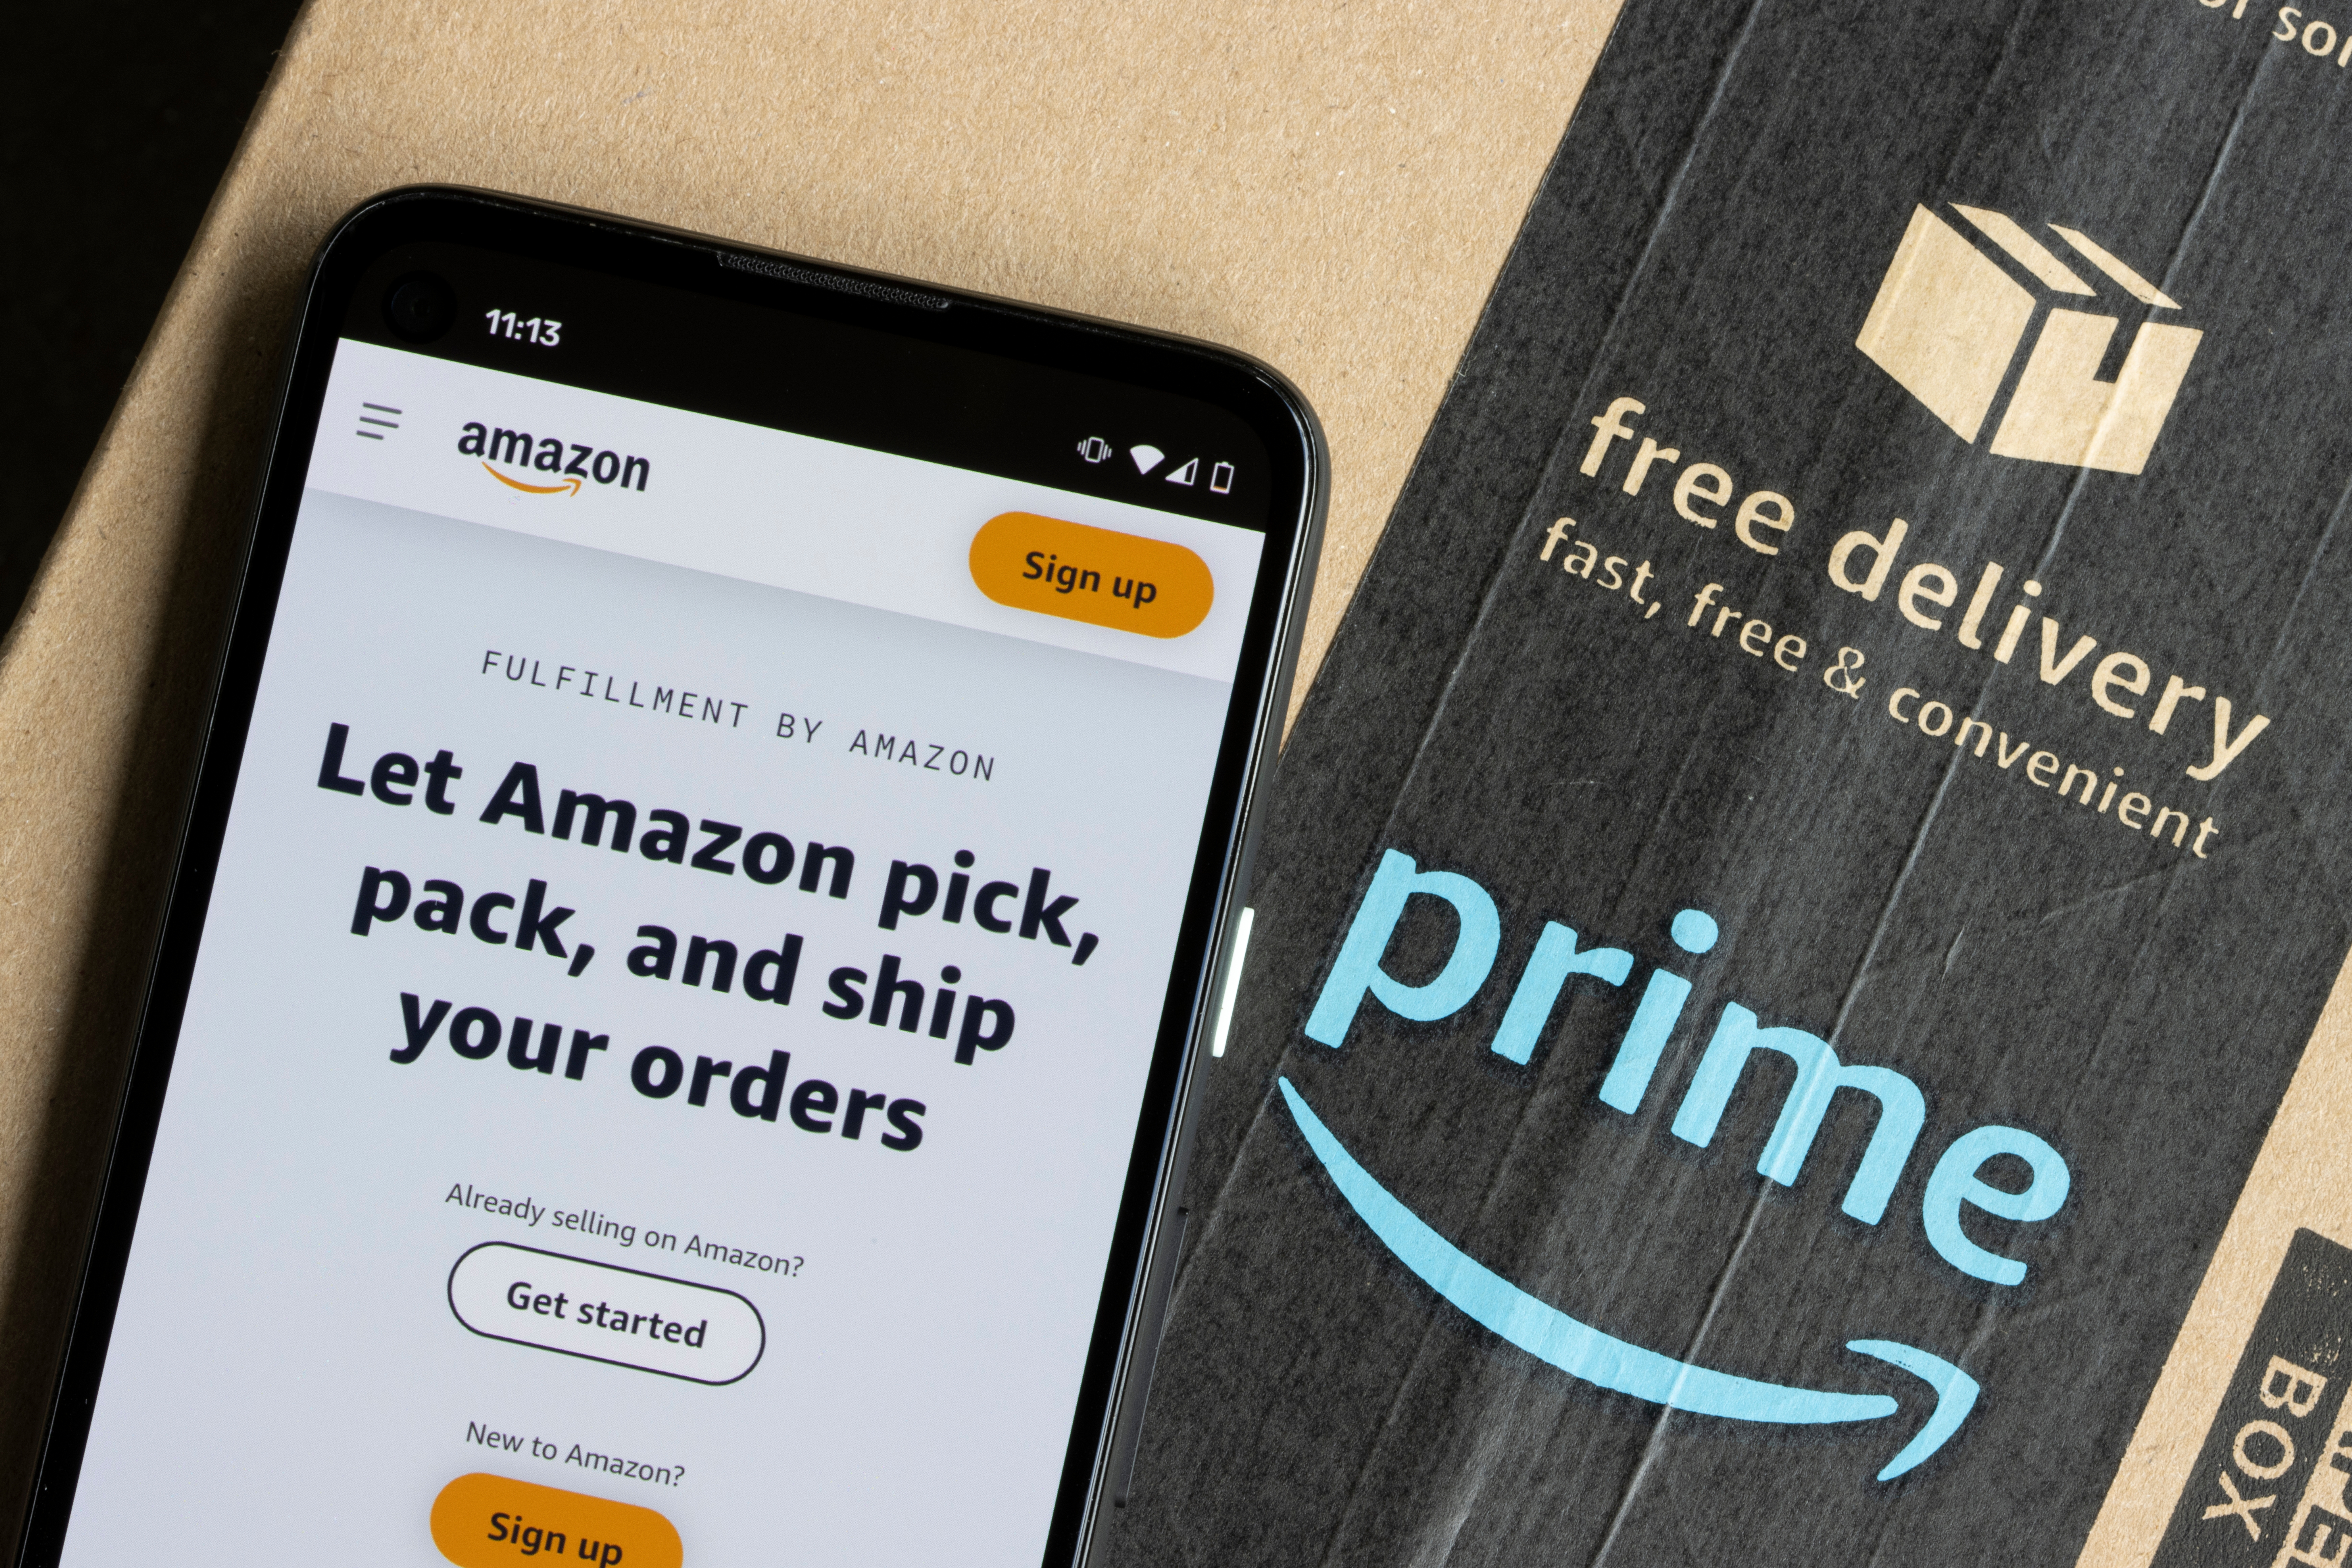 Smartphone with the Amazon logo on it next to an Amazon shipping box